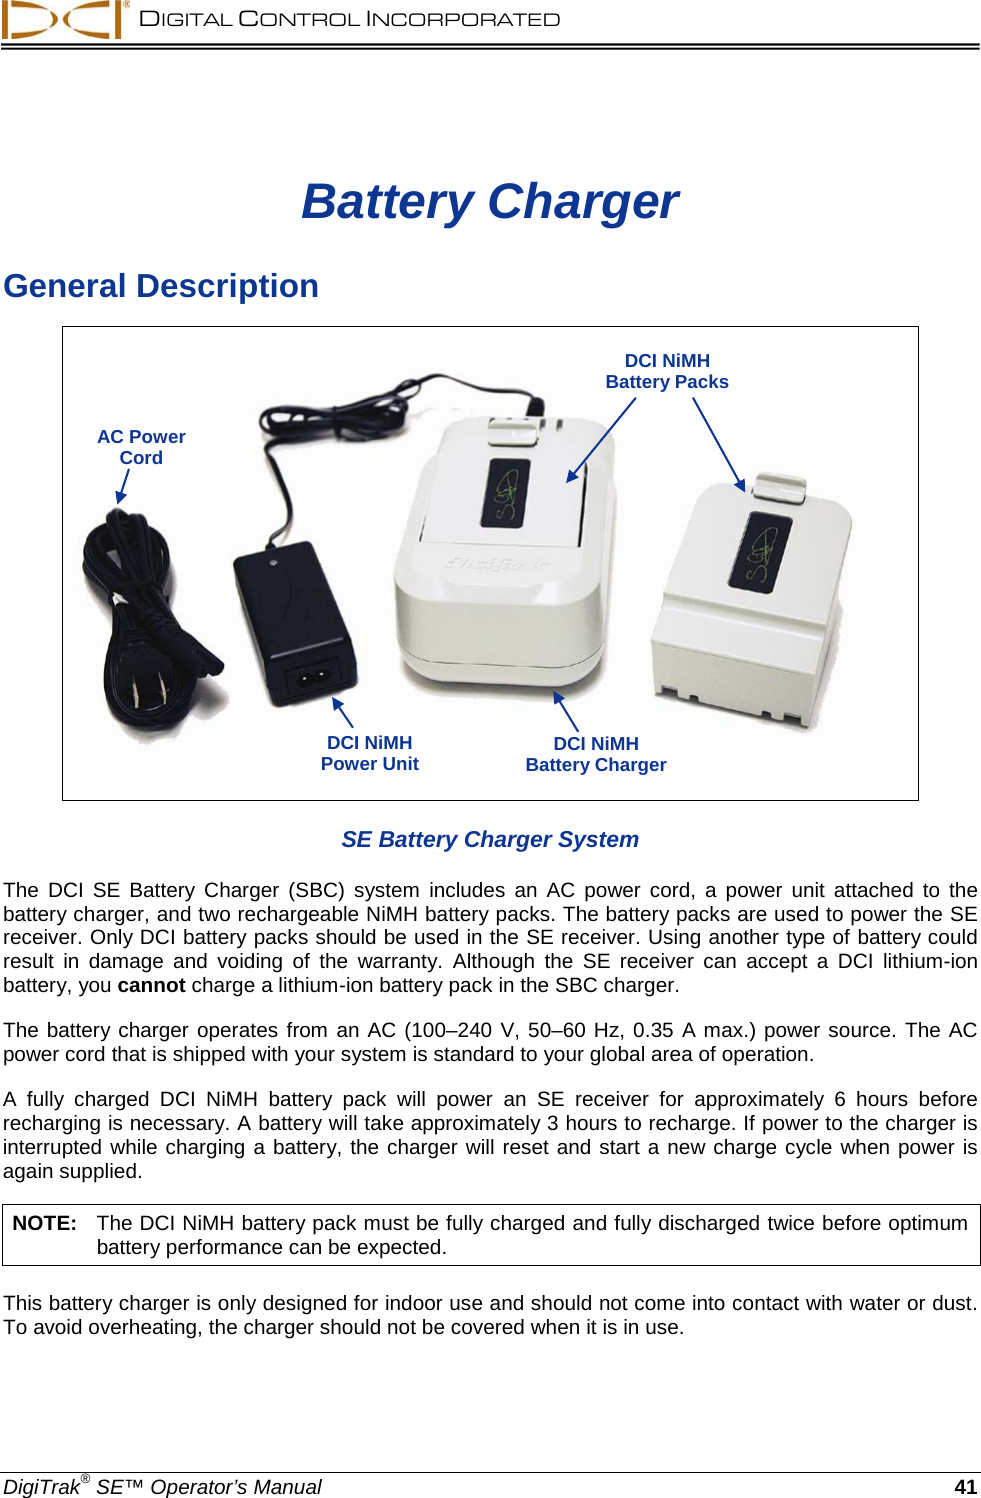  DIGITAL CONTROL INCORPORATED  DigiTrak® SE™ Operator’s Manual 41 Battery Charger General Description  SE Battery Charger System The  DCI SE Battery Charger (SBC) system  includes  an  AC power cord,  a  power unit attached to the battery charger, and two rechargeable NiMH battery packs. The battery packs are used to power the SE receiver. Only DCI battery packs should be used in the SE receiver. Using another type of battery could result in damage and voiding of the warranty. Although the SE receiver can  accept a DCI lithium-ion battery, you cannot charge a lithium-ion battery pack in the SBC charger. The battery charger operates from an AC (100–240 V, 50–60 Hz, 0.35 A max.) power source. The AC power cord that is shipped with your system is standard to your global area of operation.  A fully charged DCI  NiMH battery pack will power an SE receiver for approximately 6 hours before recharging is necessary. A battery will take approximately 3 hours to recharge. If power to the charger is interrupted while charging a battery, the charger will reset and start a new charge cycle when power is again supplied. NOTE:   The DCI NiMH battery pack must be fully charged and fully discharged twice before optimum battery performance can be expected. This battery charger is only designed for indoor use and should not come into contact with water or dust. To avoid overheating, the charger should not be covered when it is in use. AC Power Cord DCI NiMH  Power Unit DCI NiMH Battery Packs  DCI NiMH  Battery Charger 